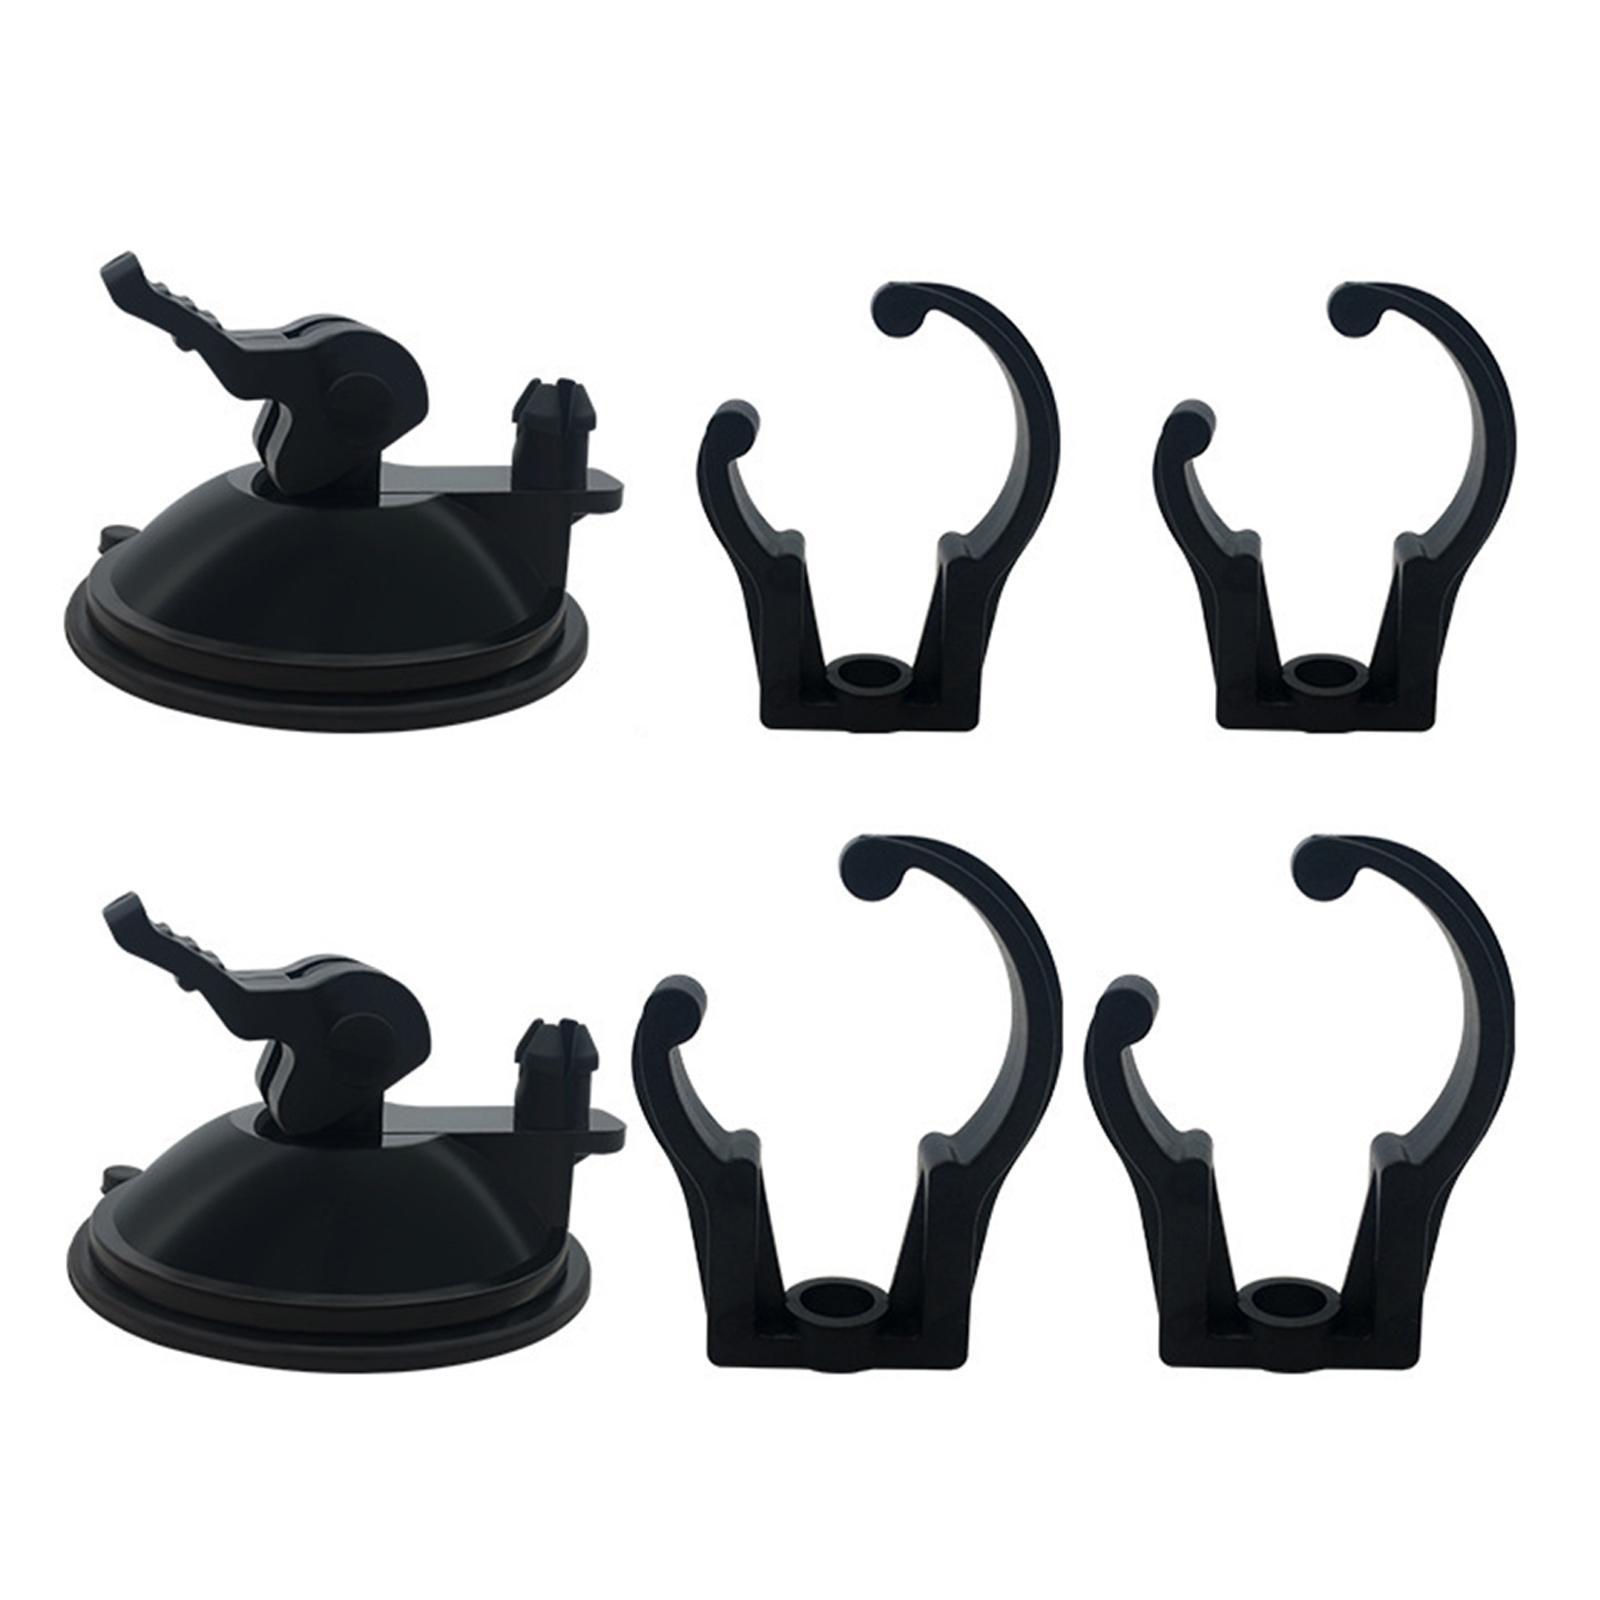 Aquarium Suction Cup Clips Fish Tank Hose Holder Clips Water Pipes LED Light